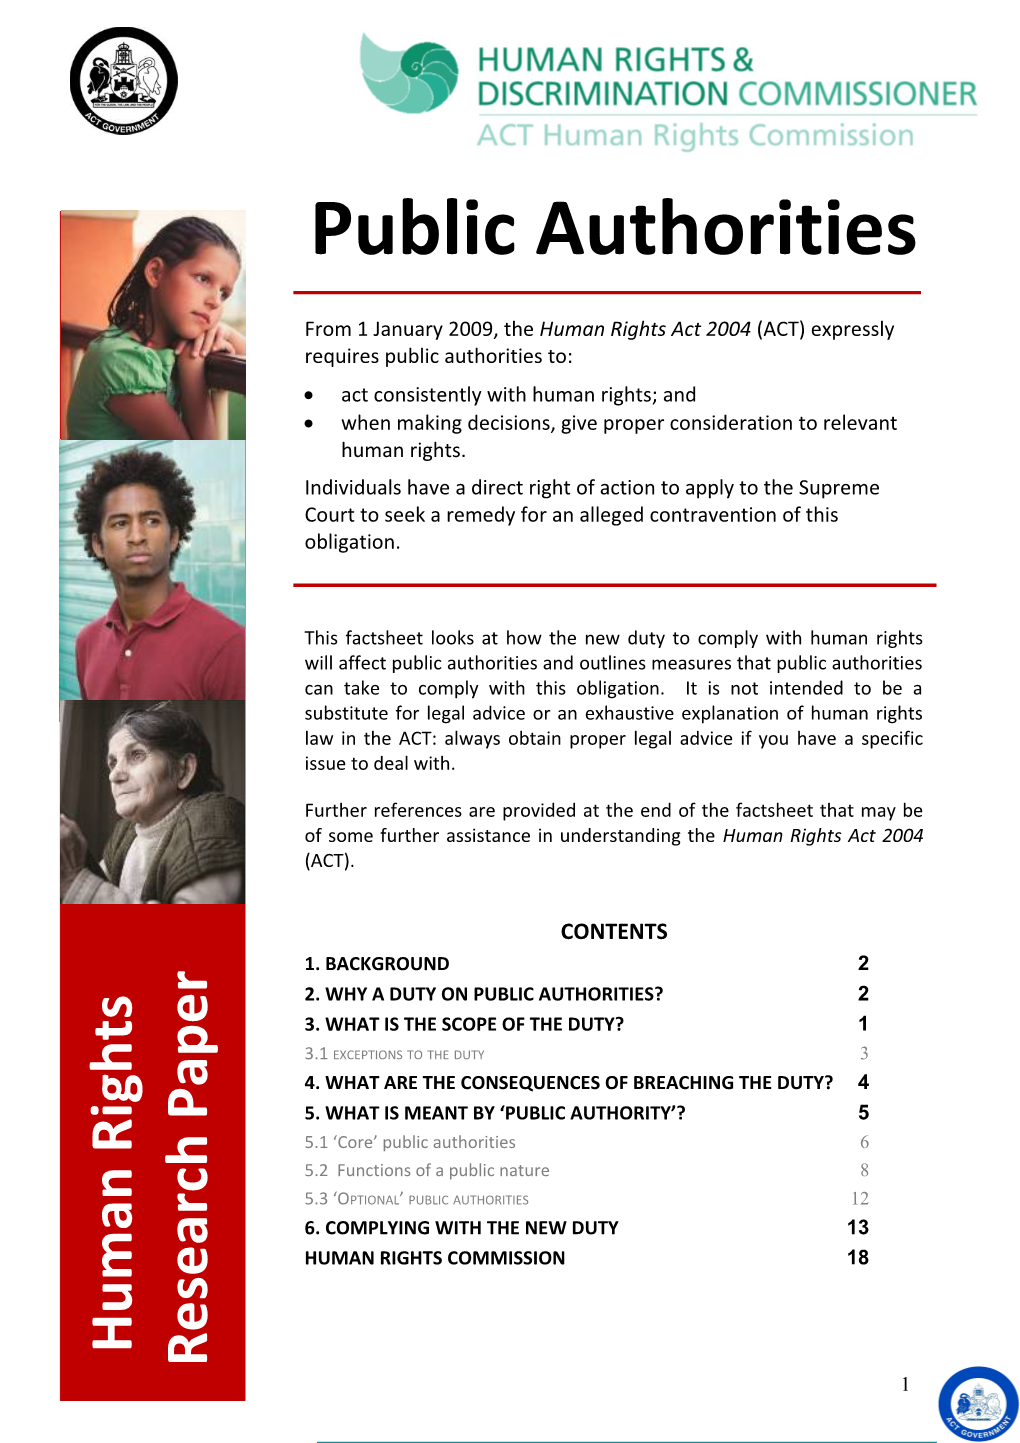 From 1 January 2009, the Human Rights Act 2004 (ACT) Expressly Requires Public Authorities To